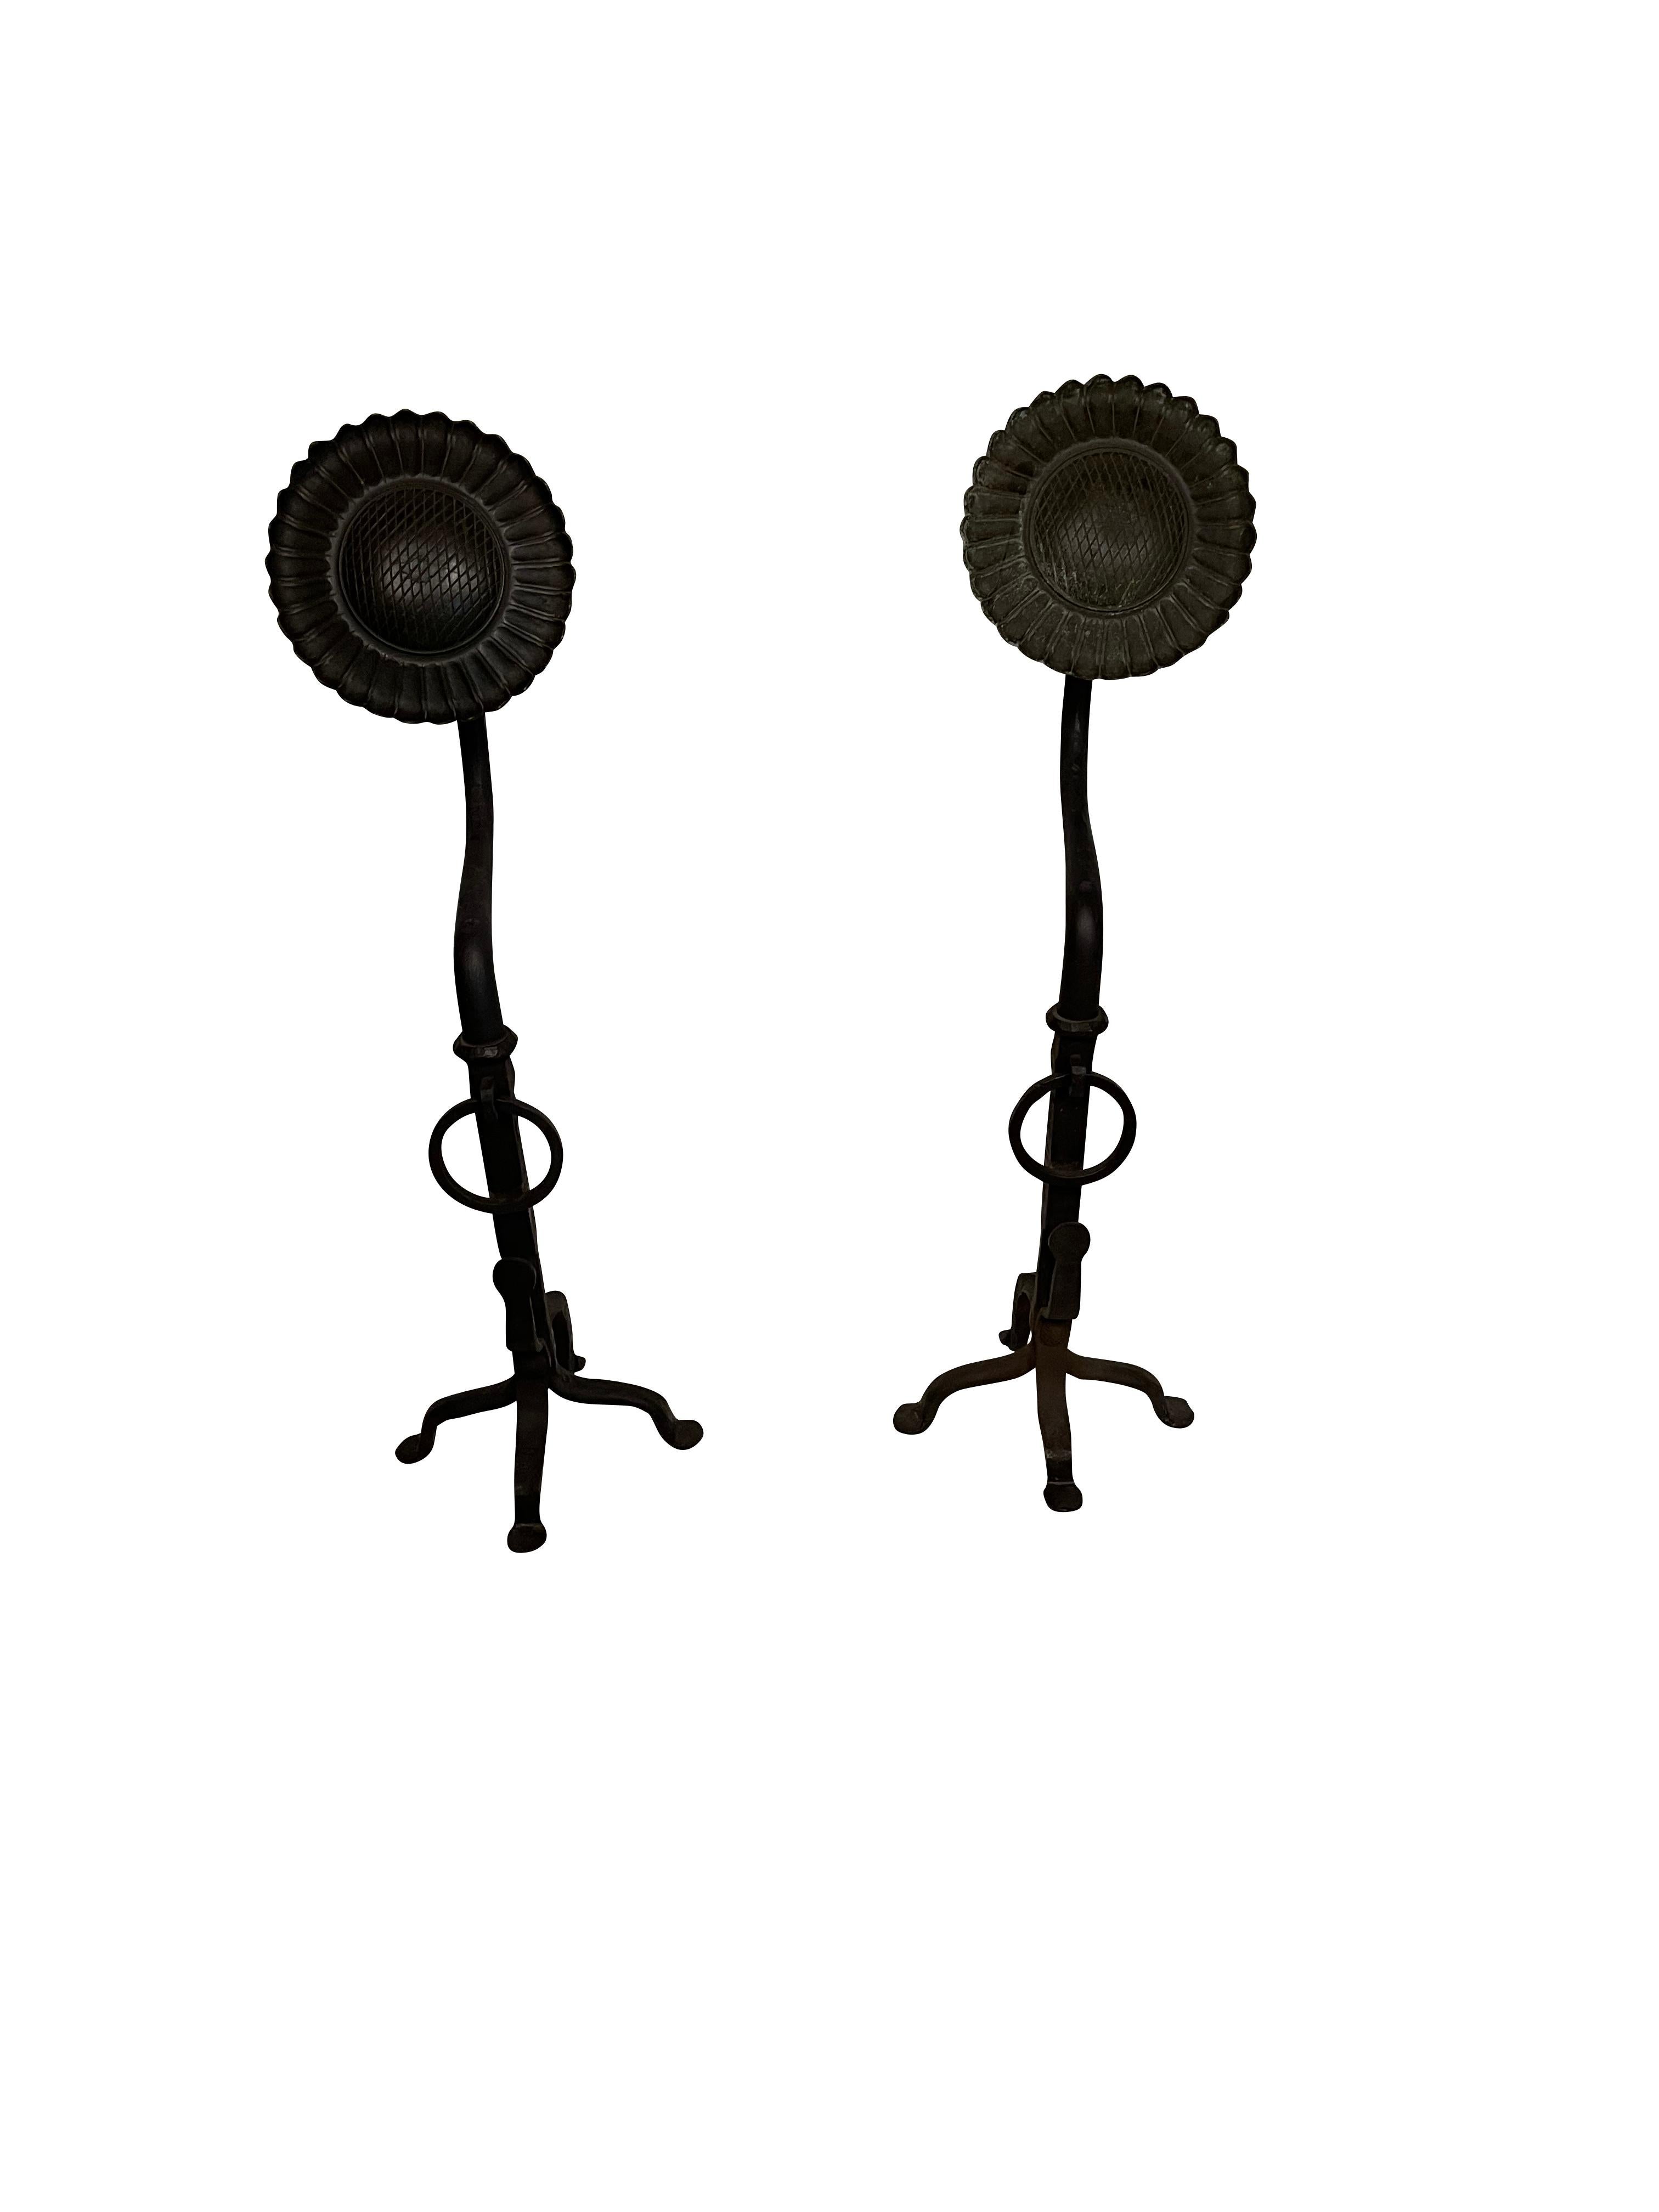 20th century wrought iron hand forged black sunflower andirons with scrolled legs and hitching post loop in the middle these spectacular andirons measure. Tall. Lovely large size.